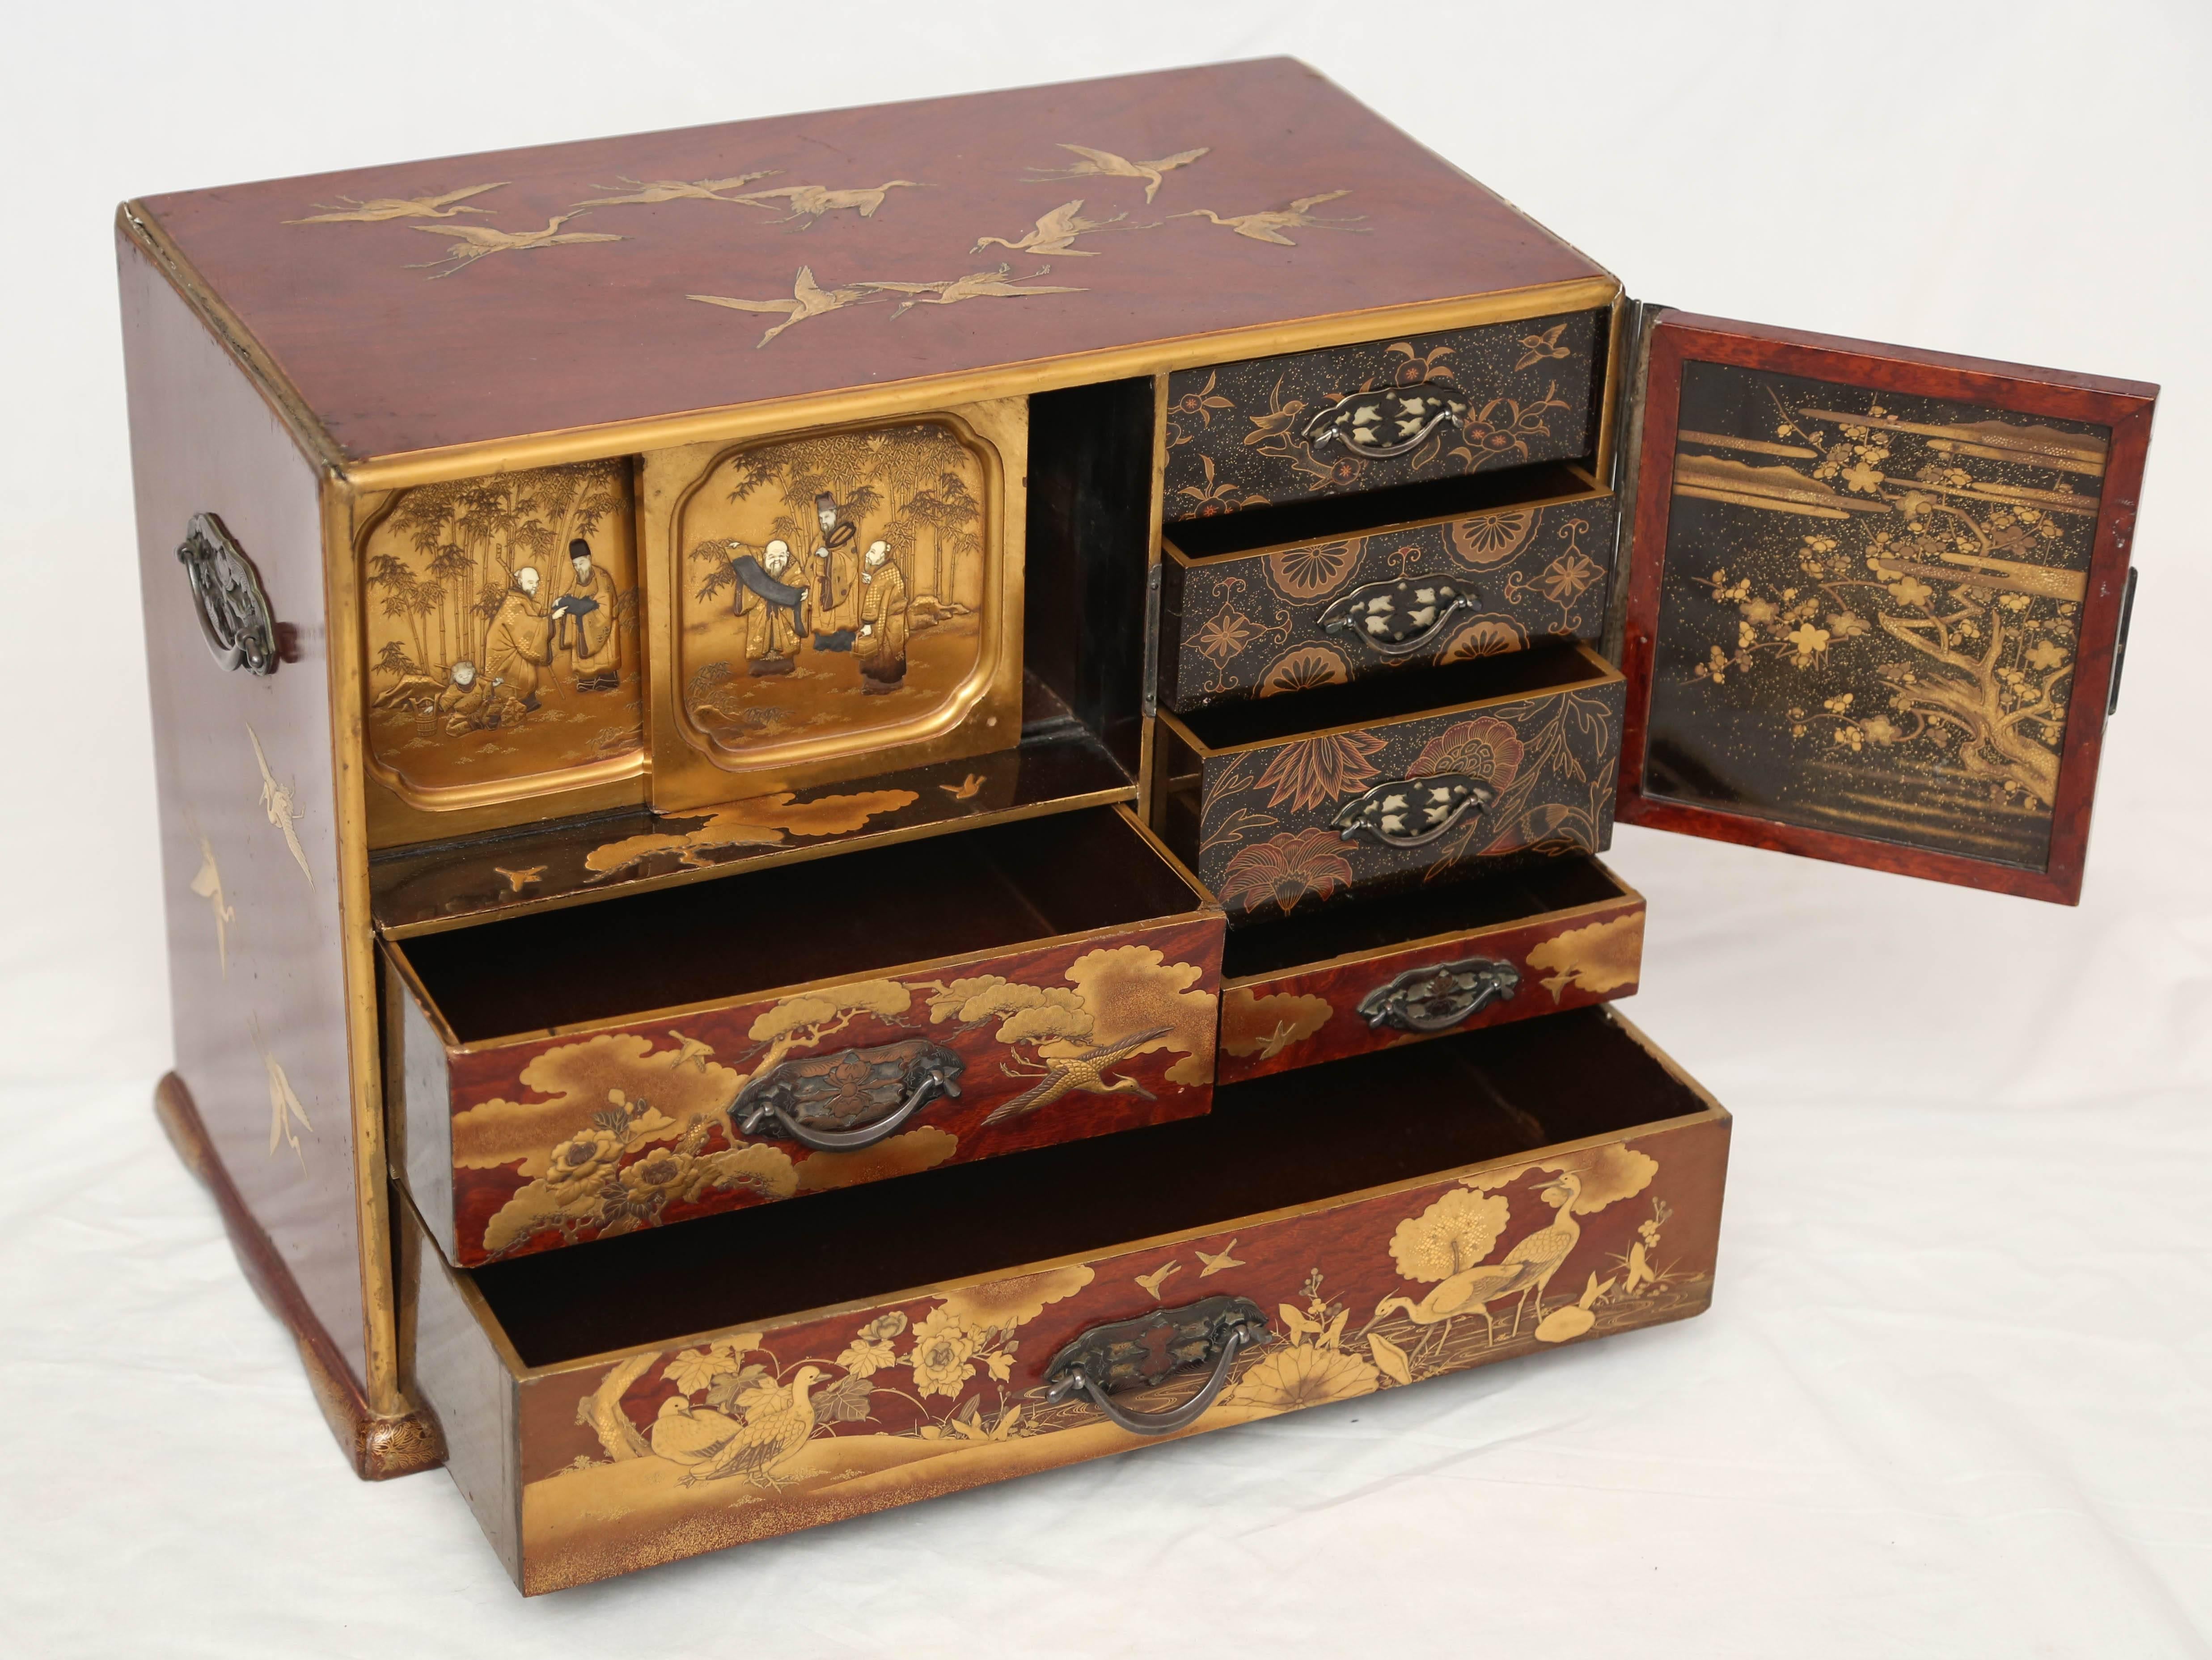 A Japanese parcel-gilt brass and bone decorated veneered Keyaki elm Meiji Period (1868-1912), and late 19th century, the rectangular top decorated with nine cranes in flight over a cupboard door at right with a decorative floral zagane and